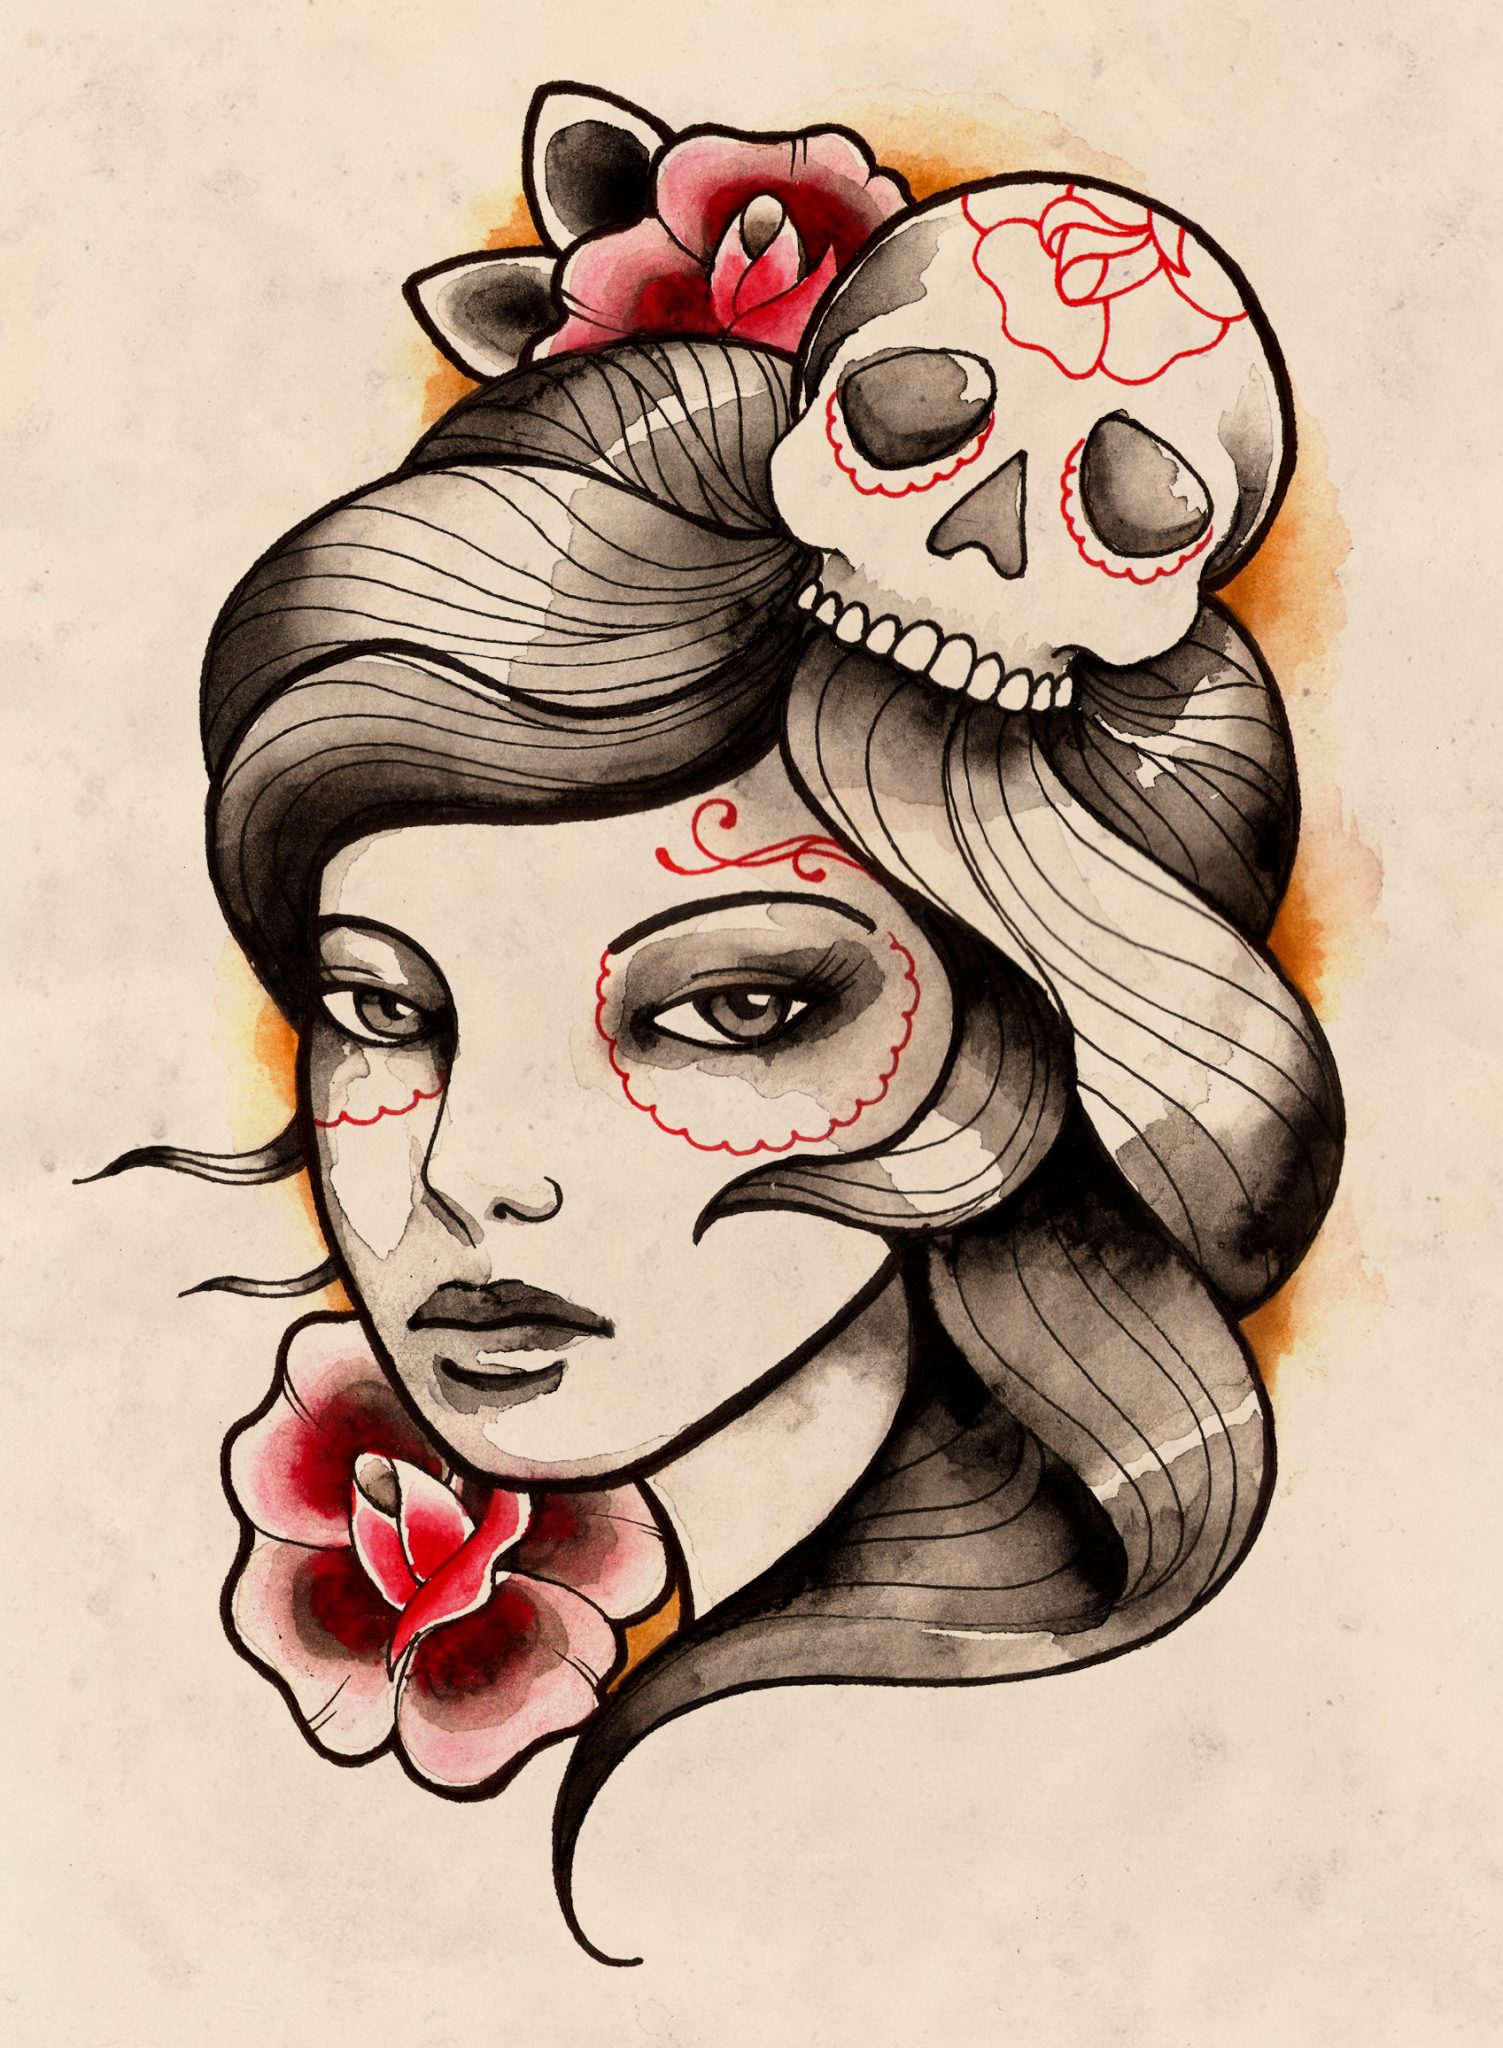 Art Print Delia Poster Black and White Day of the Dead Sugar Skull Girl  Tattoo Art Illustration 5x7, 8x10, 10.5x13.8, or 11x17 Inch - Etsy Sweden